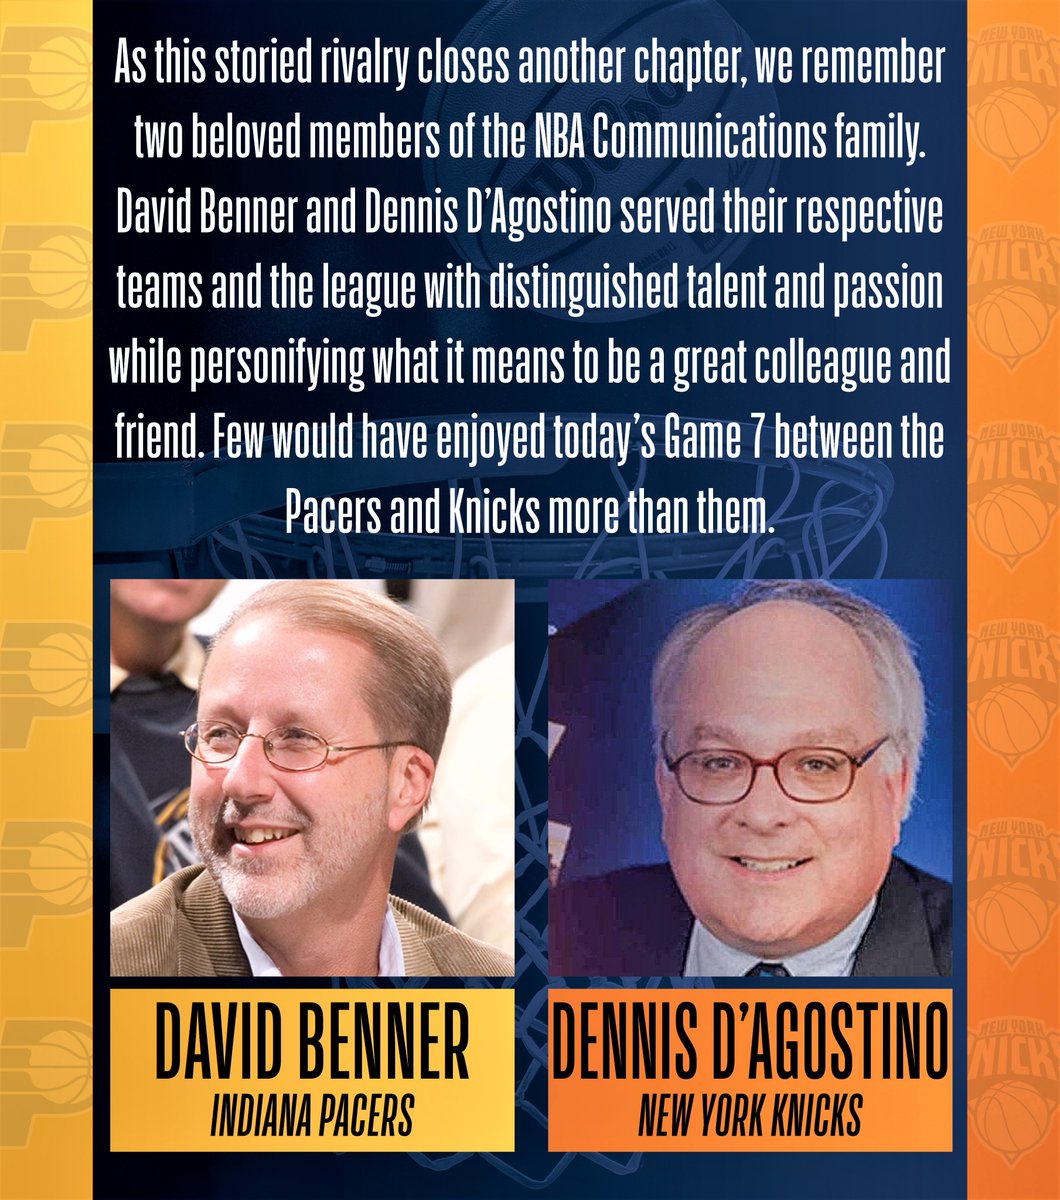 Prior to today’s Game 7, we remember David Benner and Dennis D’Agostino.